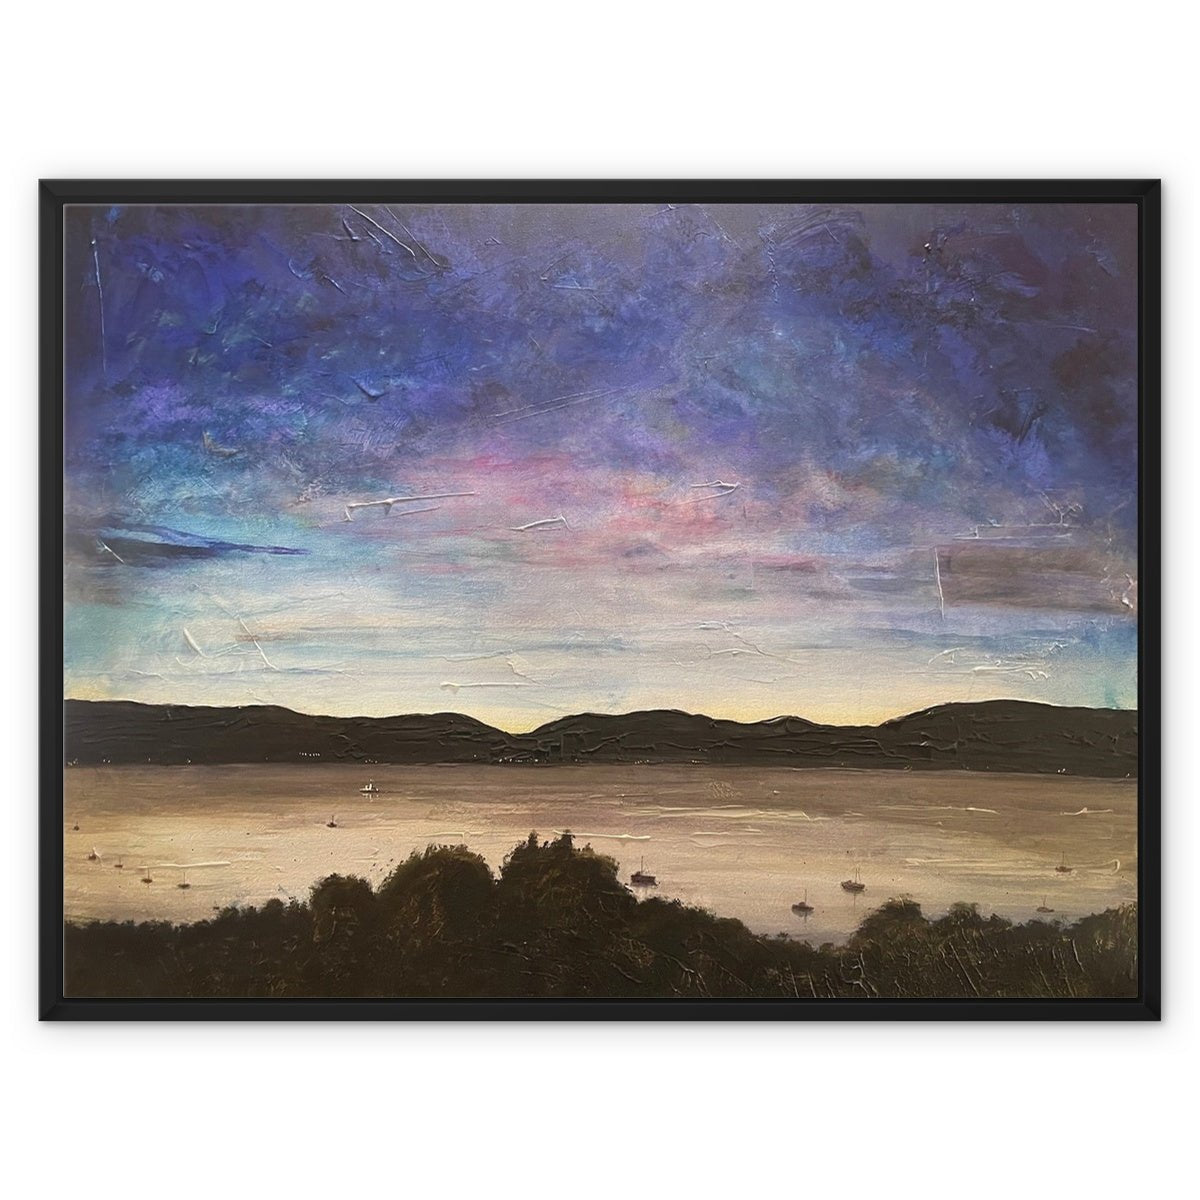 River Clyde Twilight Painting | Framed Canvas From Scotland-Floating Framed Canvas Prints-River Clyde Art Gallery-32"x24"-Black Frame-Paintings, Prints, Homeware, Art Gifts From Scotland By Scottish Artist Kevin Hunter